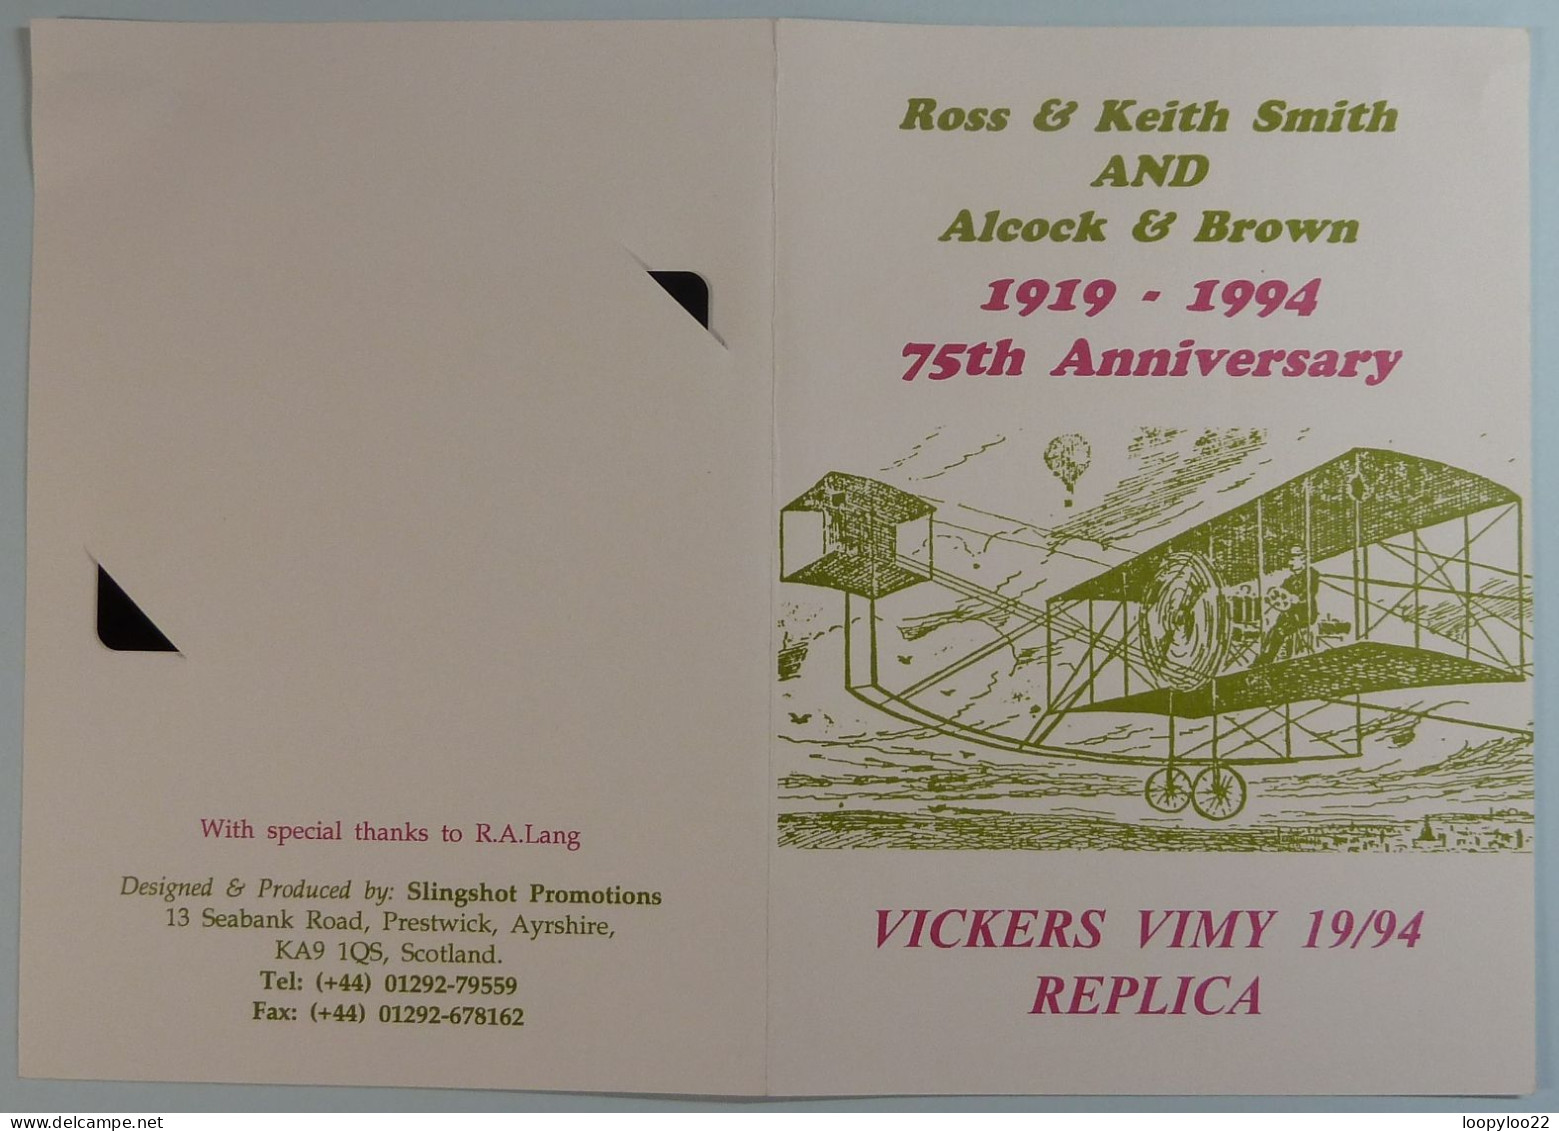 UK - BT - L&G - Vickers Vimy Replica - Smith Alcock & Brown - BTG435 - 405K - 500ex - Limited Edition - Mint In Folder - BT General Issues